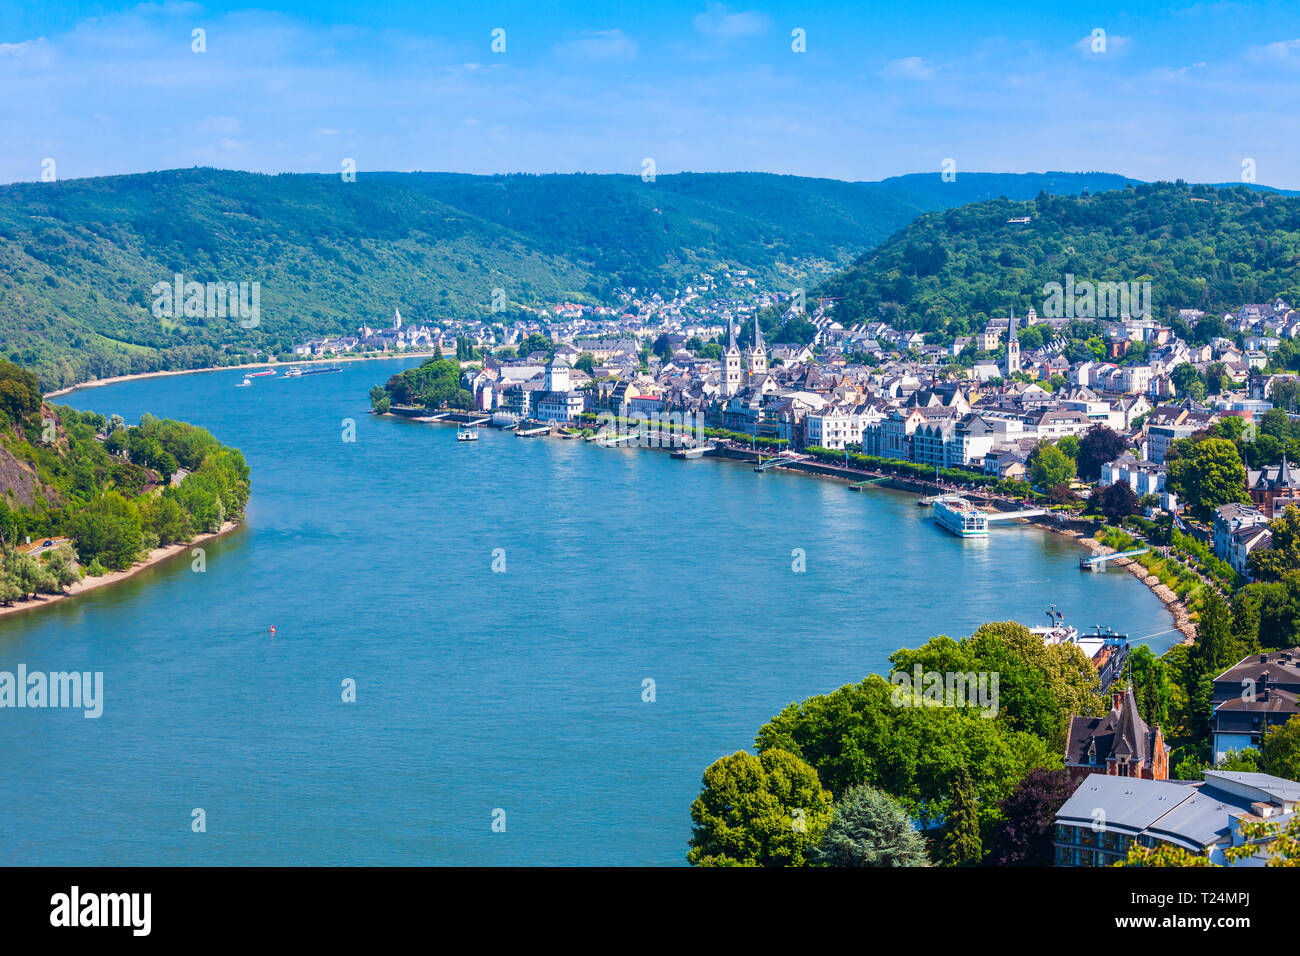 Boppard town aerial panoramic view from Gedeonseck viewpoint. Boppard is the town in the Rhine valley in Germany. Stock Photo